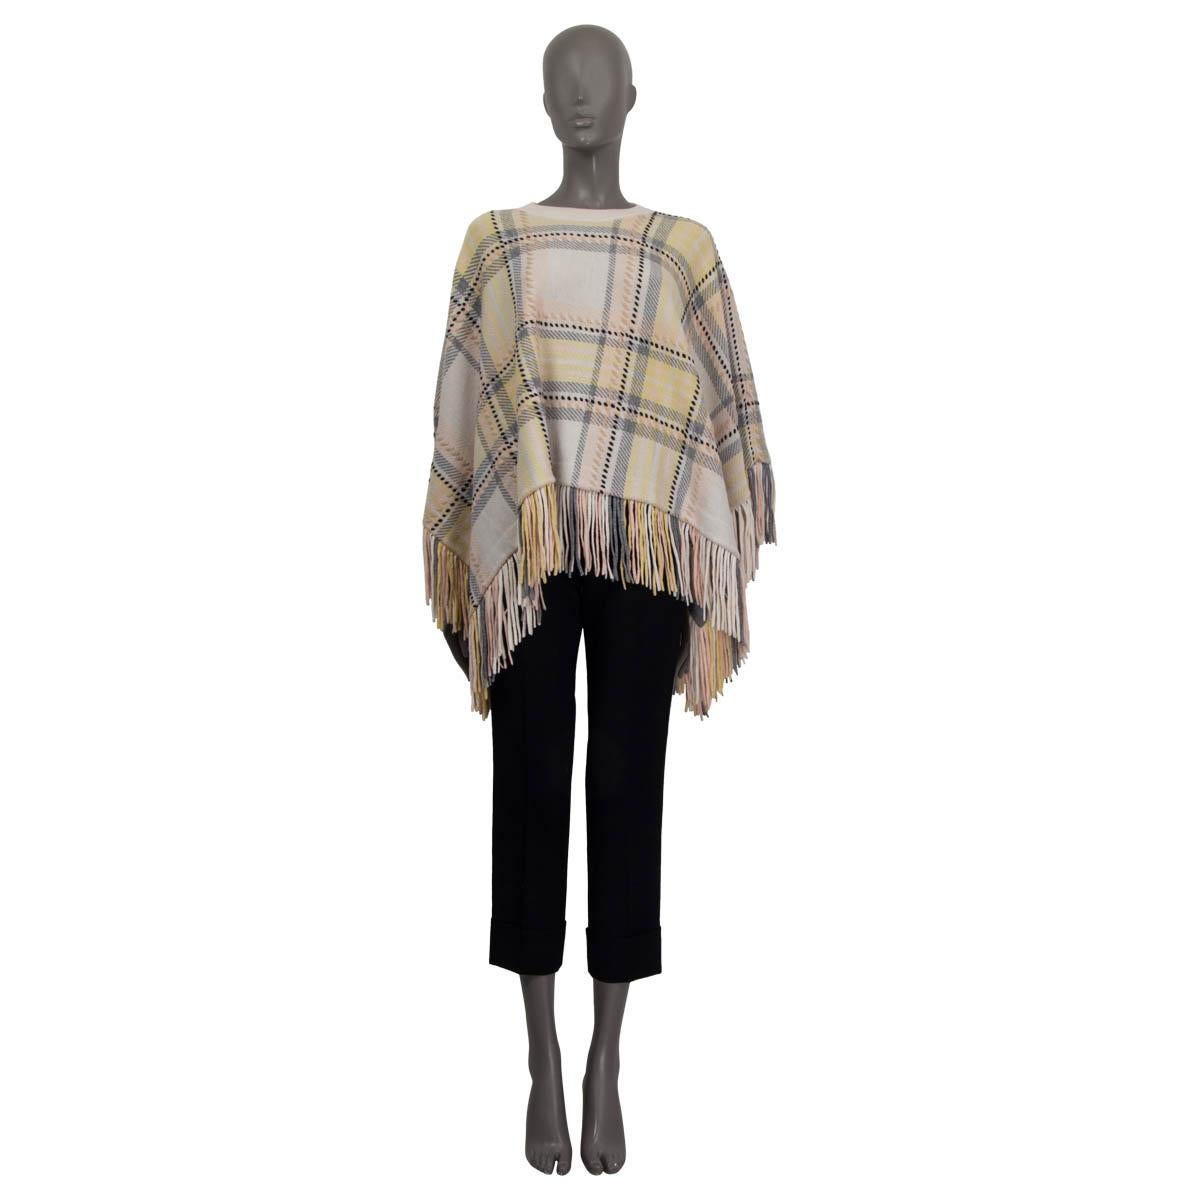 100% authentic Chloe plaid knit poncho in nude, pale pink, pale gray and pale yellow wool (95%) and cashmere (5%). Features a fringed hemline. Unlined. Has been worn and is in excellent condition.

Measurements
Tag Size	XS-S
Size	S
Bust From	160cm